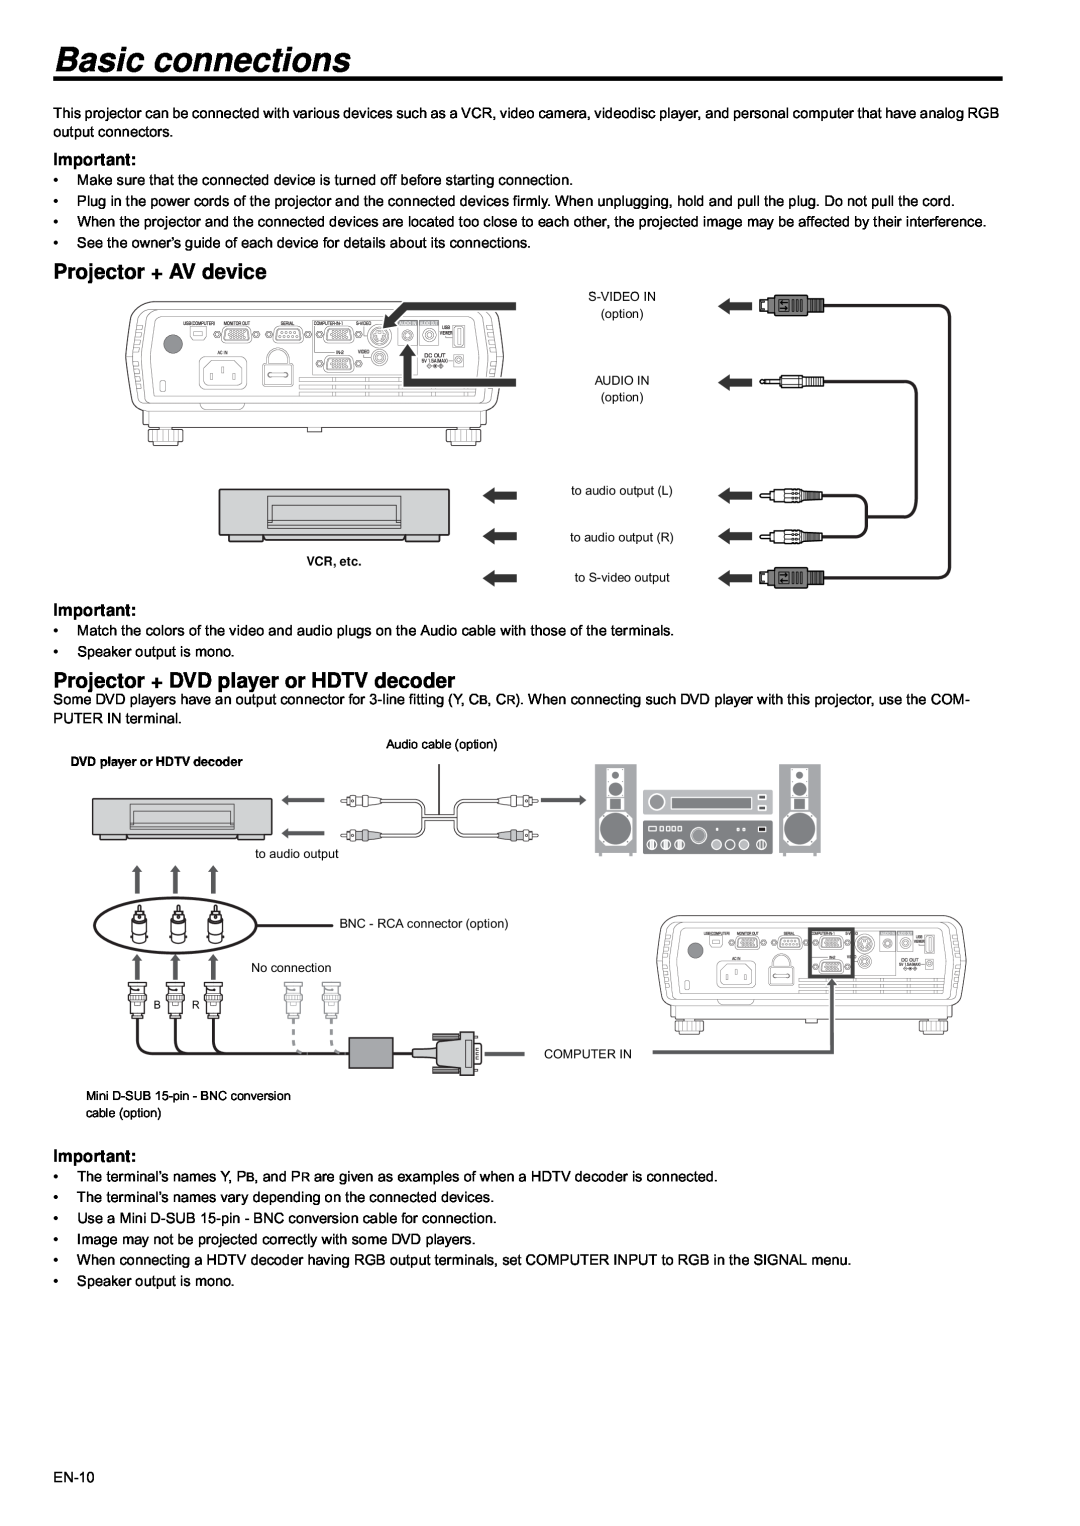 Mitsubishi Electronics XD435U-G Basic connections, Projector + AV device, Projector + DVD player or HDTV decoder 